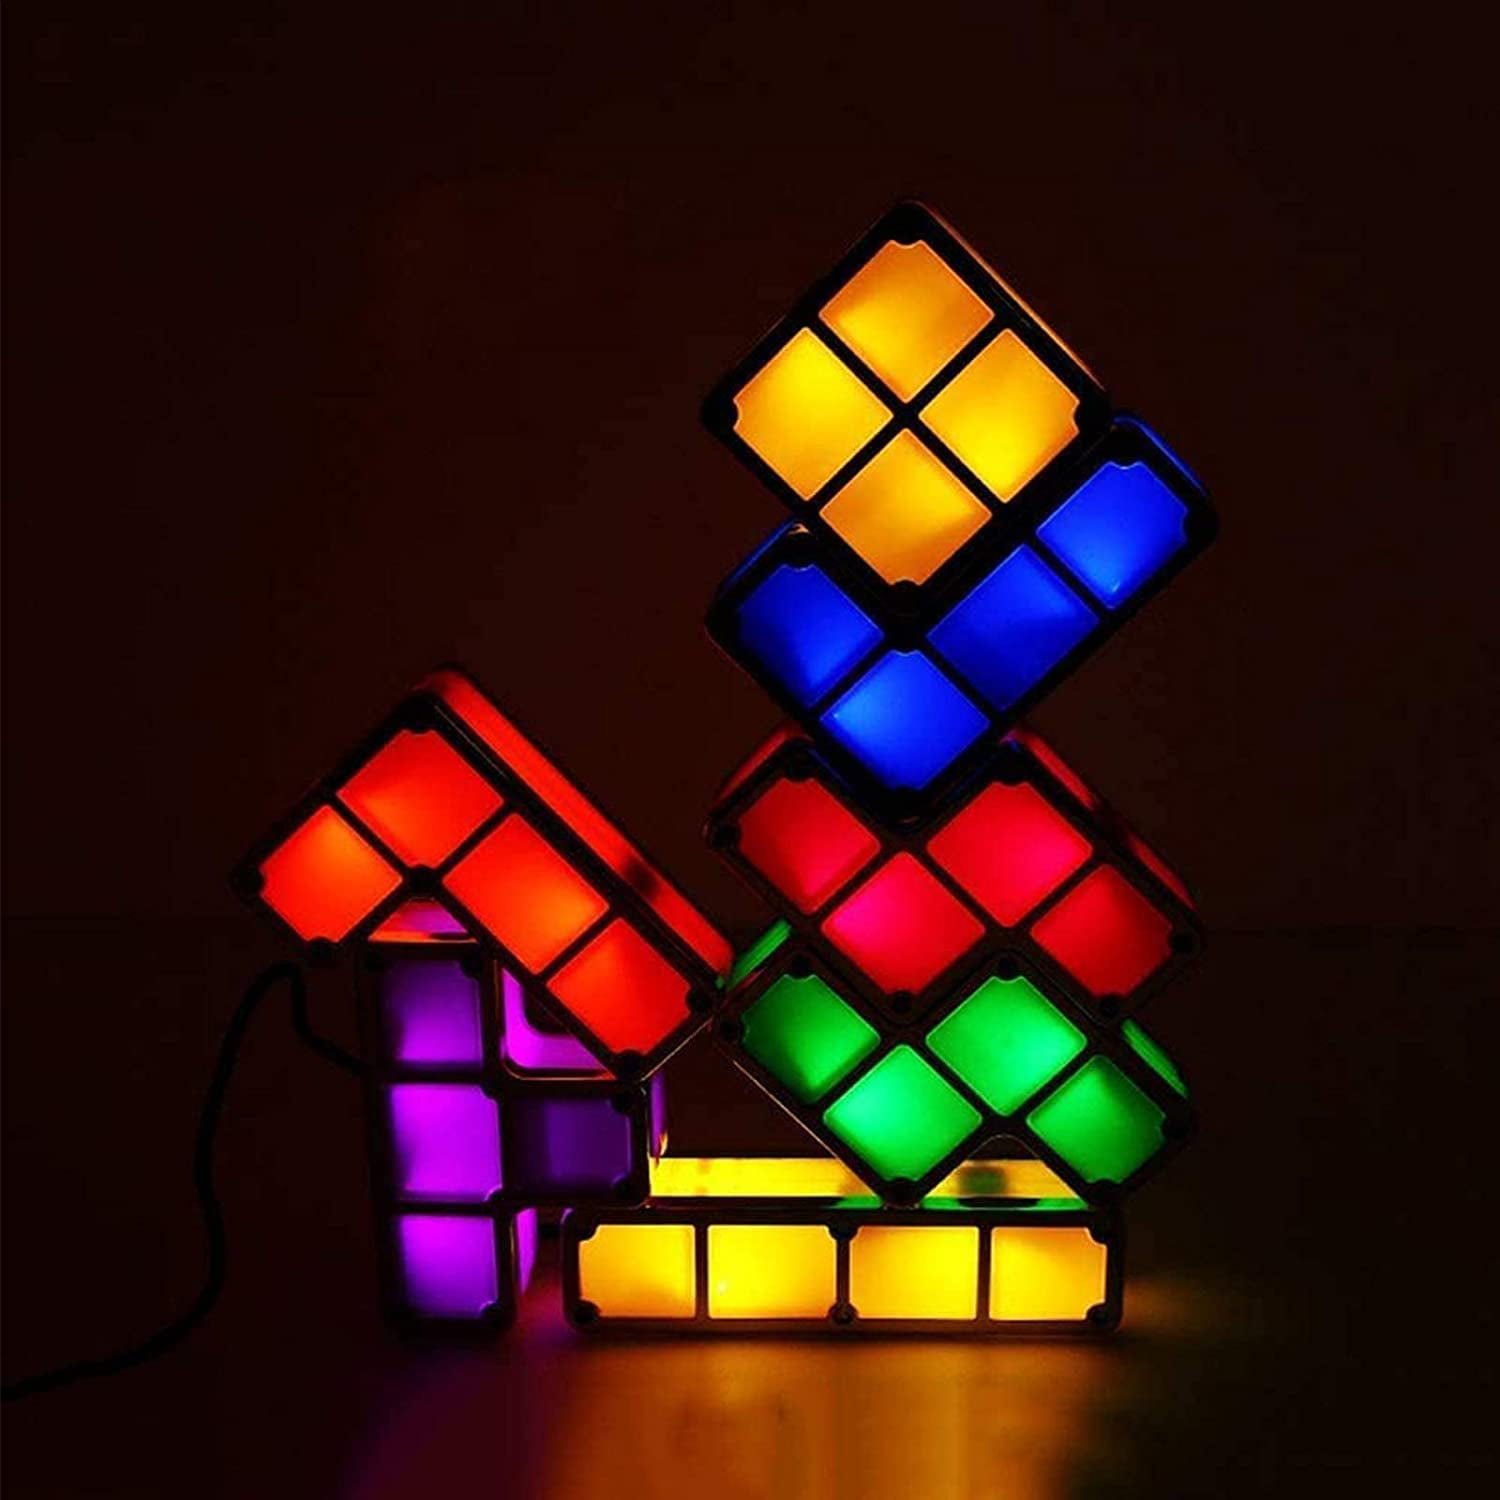 Colorful 7 Colors Night Light 7 PCS Tetris Stackable Tangram Puzzle LED Induction Interlocking Desk Lamp 3D Toys Ideal Gift for Home and Office Decorations Easy Stacking up Magical Decoration 